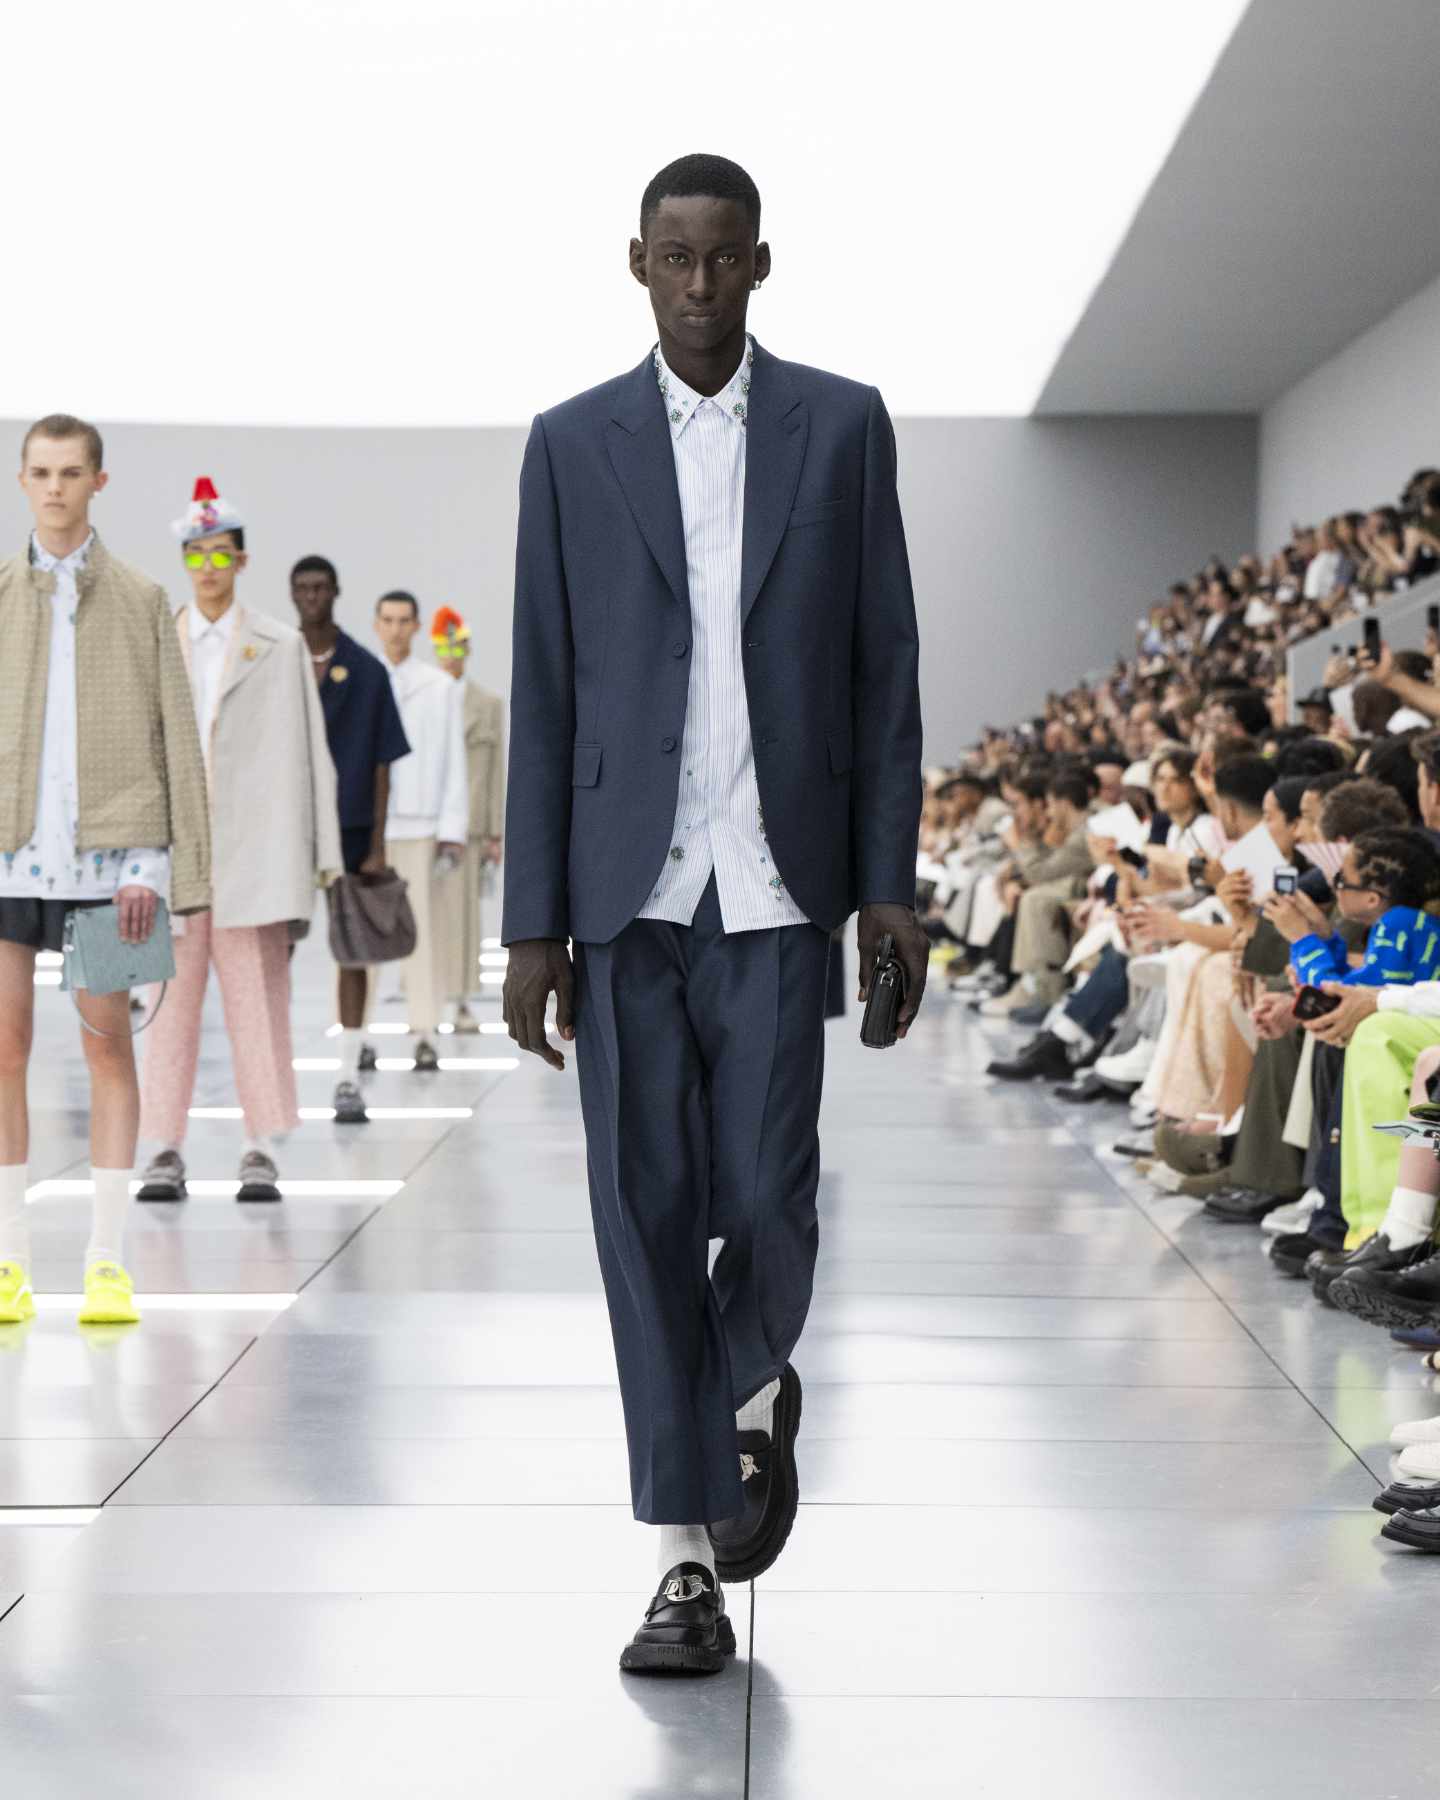 Trap Doors & Giant Hats at Dior's SS24 Menswear Collection